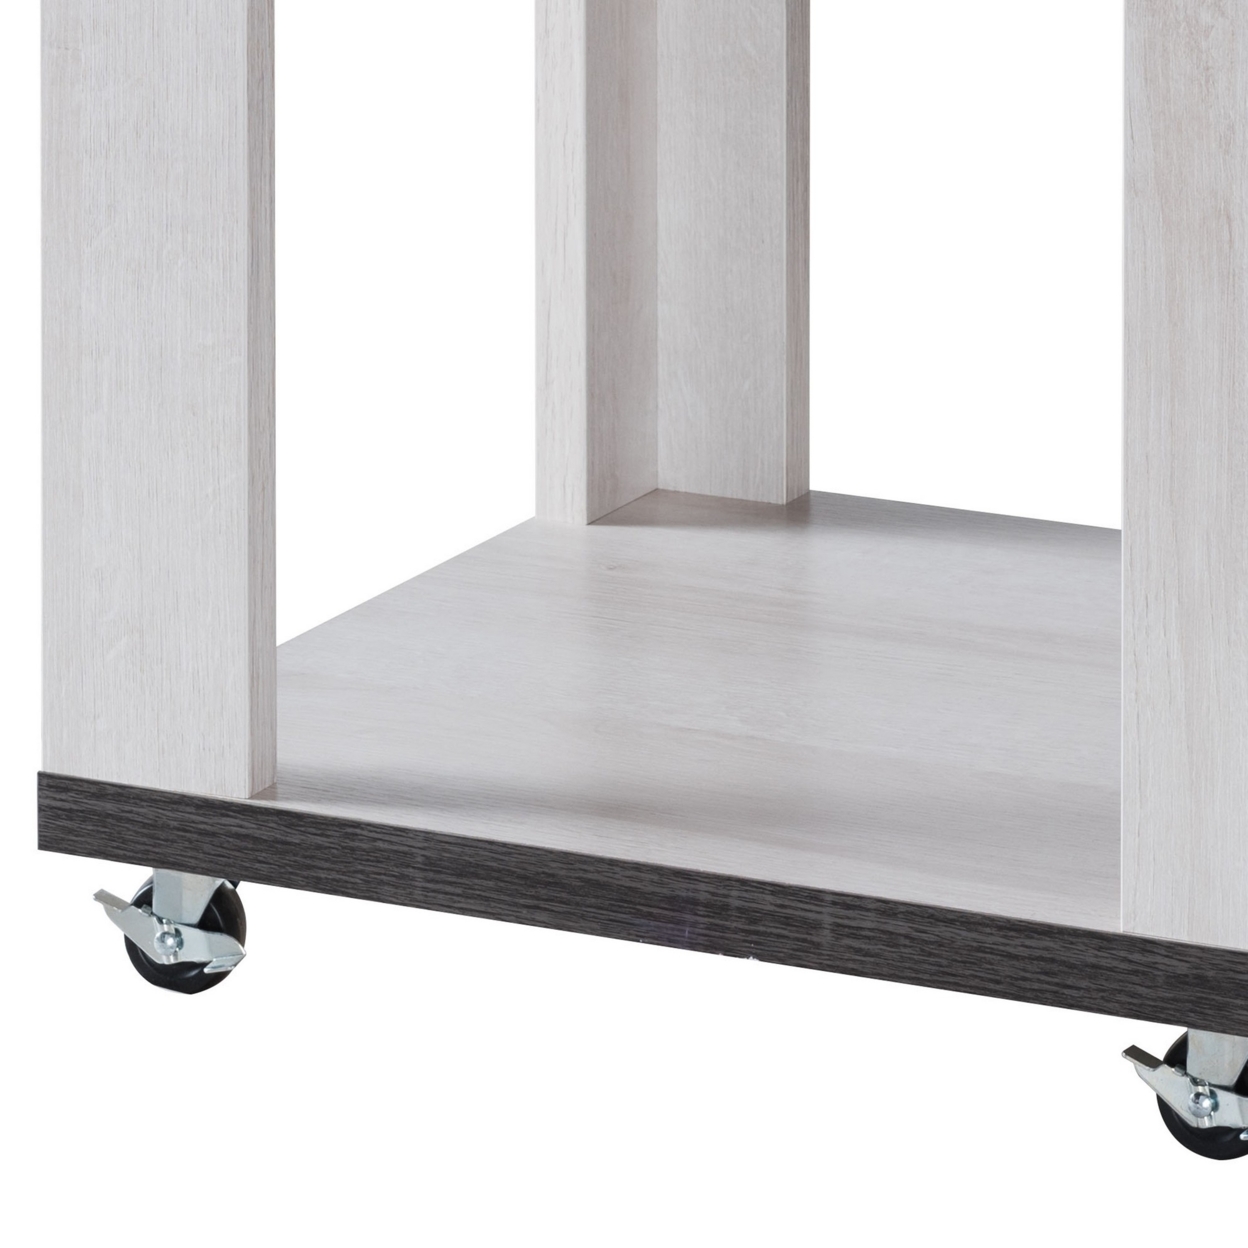 End Table With Wooden Open Bottom Shelf, White And Gray- Saltoro Sherpi